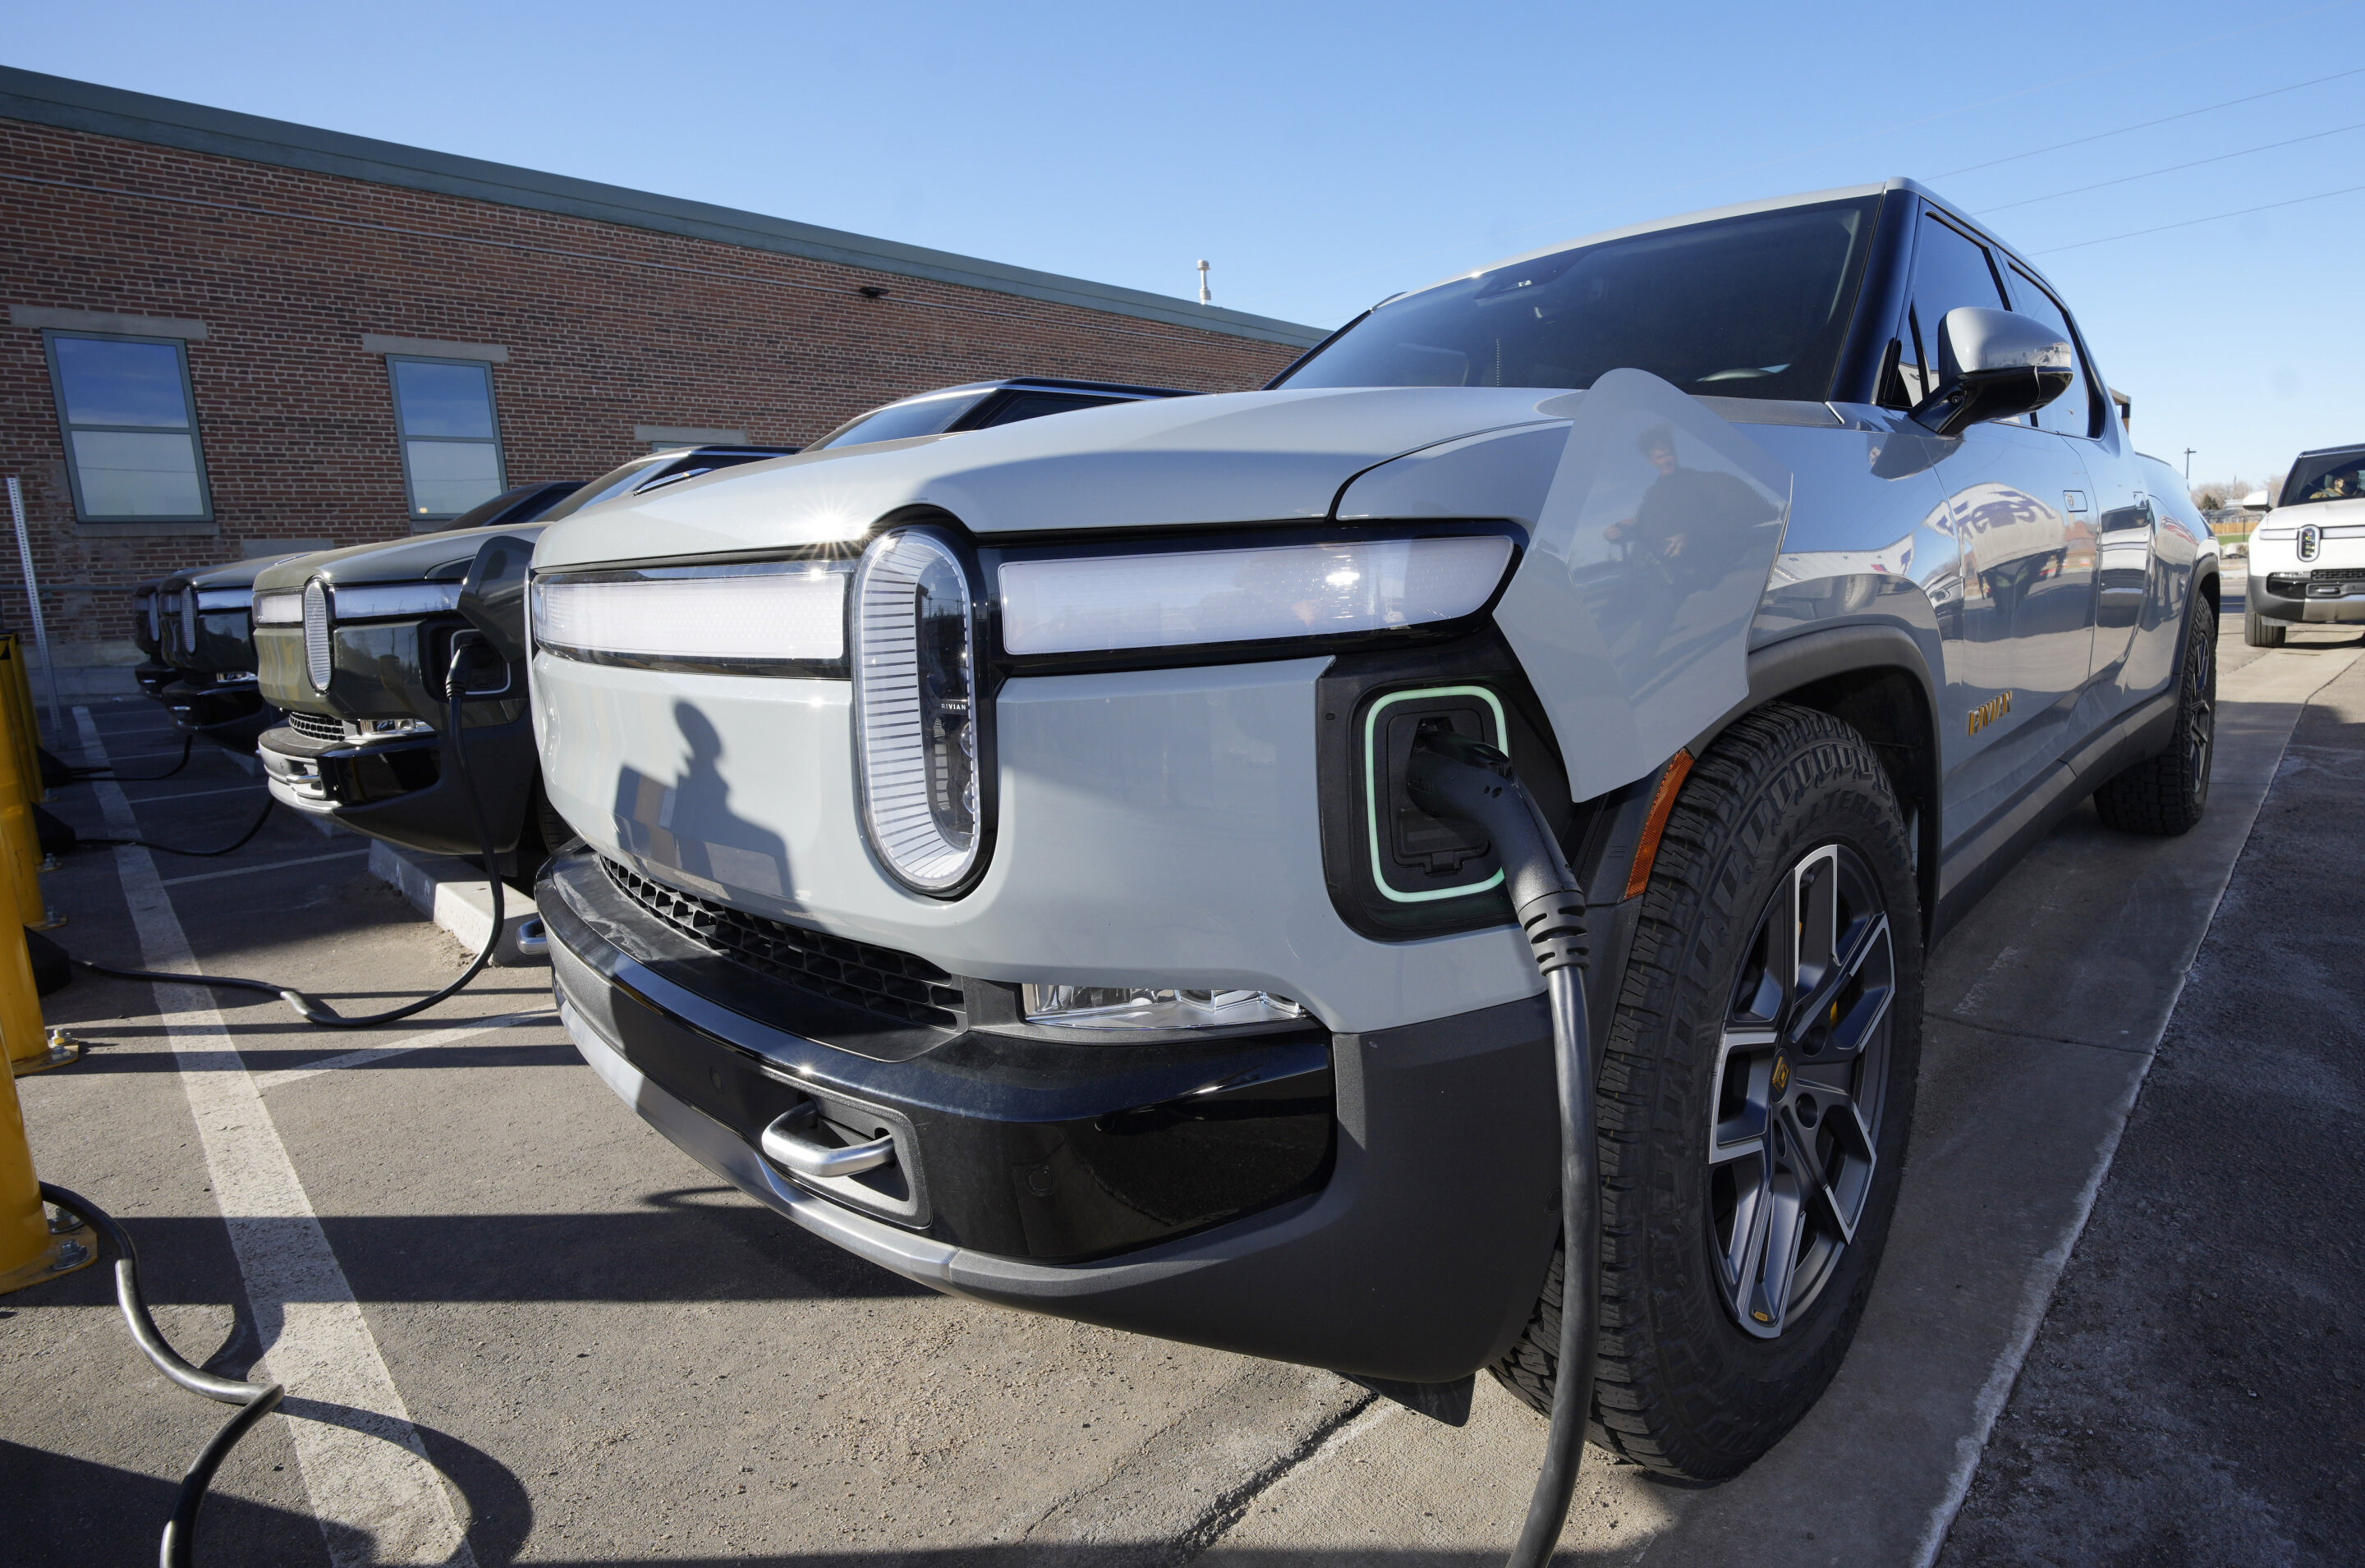 Electric vehicle maker Rivian to join Tesla charging network as automakers consider company’s plug